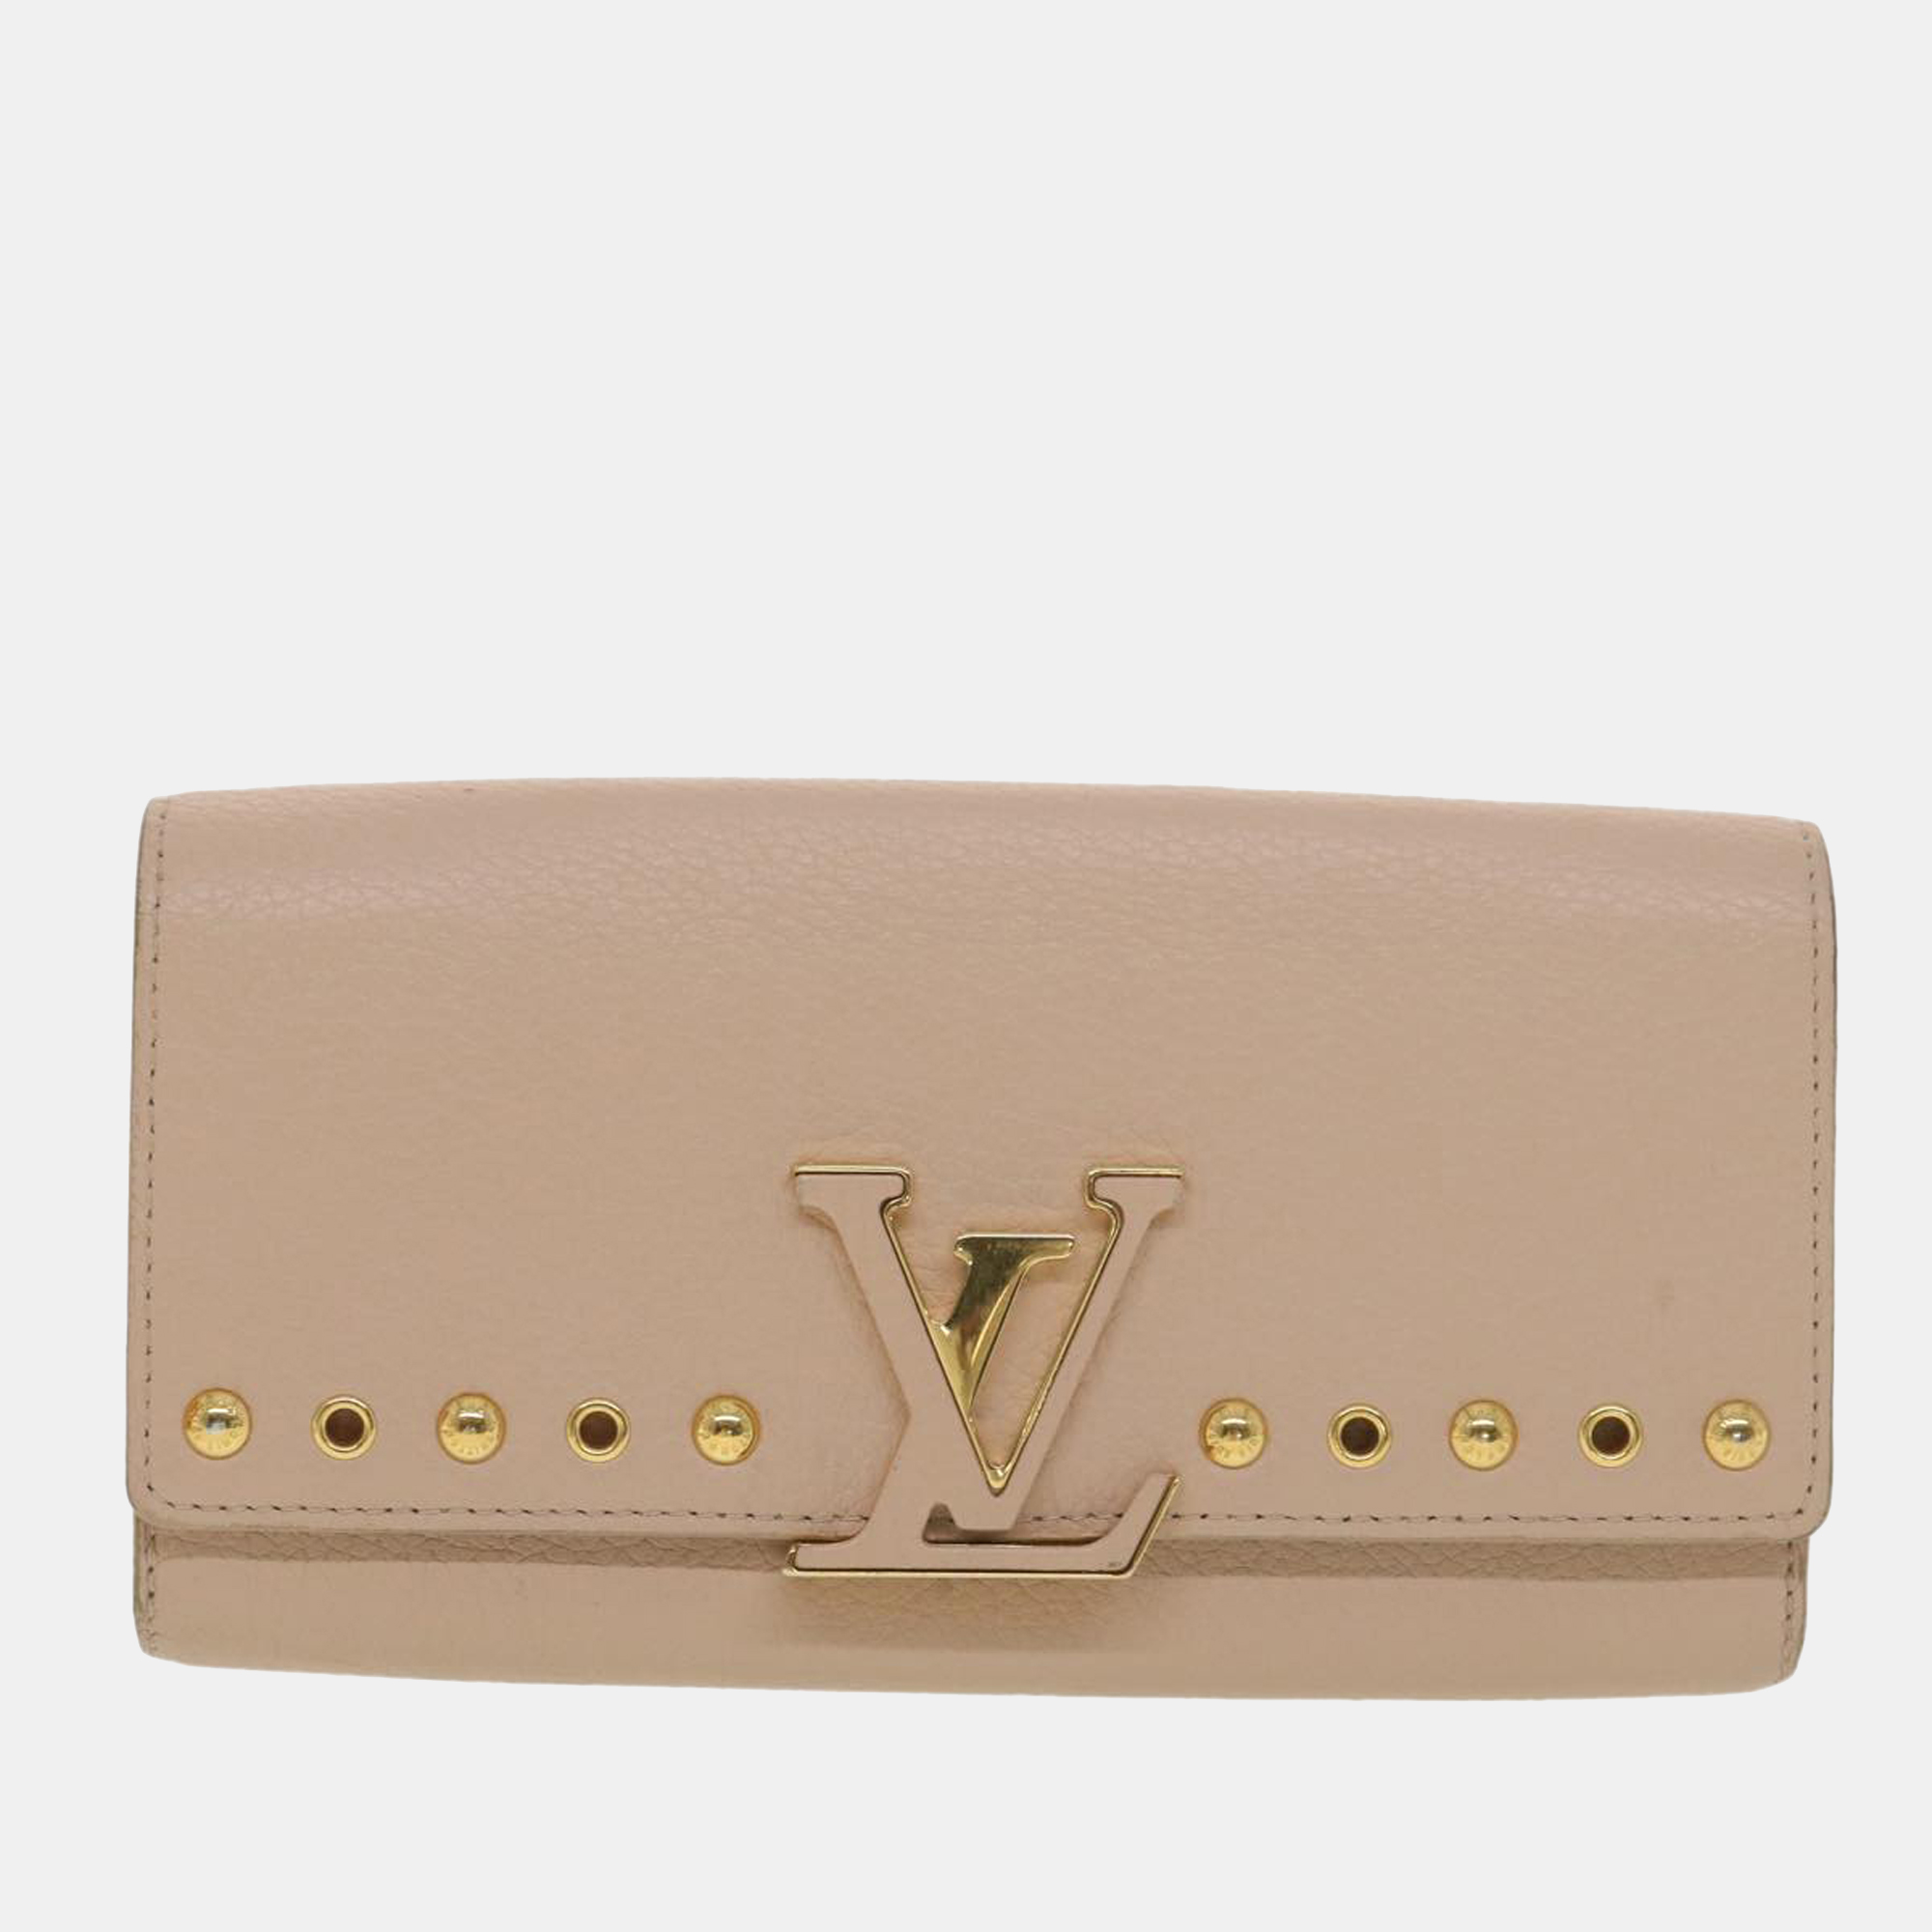 PRELOVED Louis Vuitton Beige Leather Studded Capucines Compact Wallet –  KimmieBBags LLC